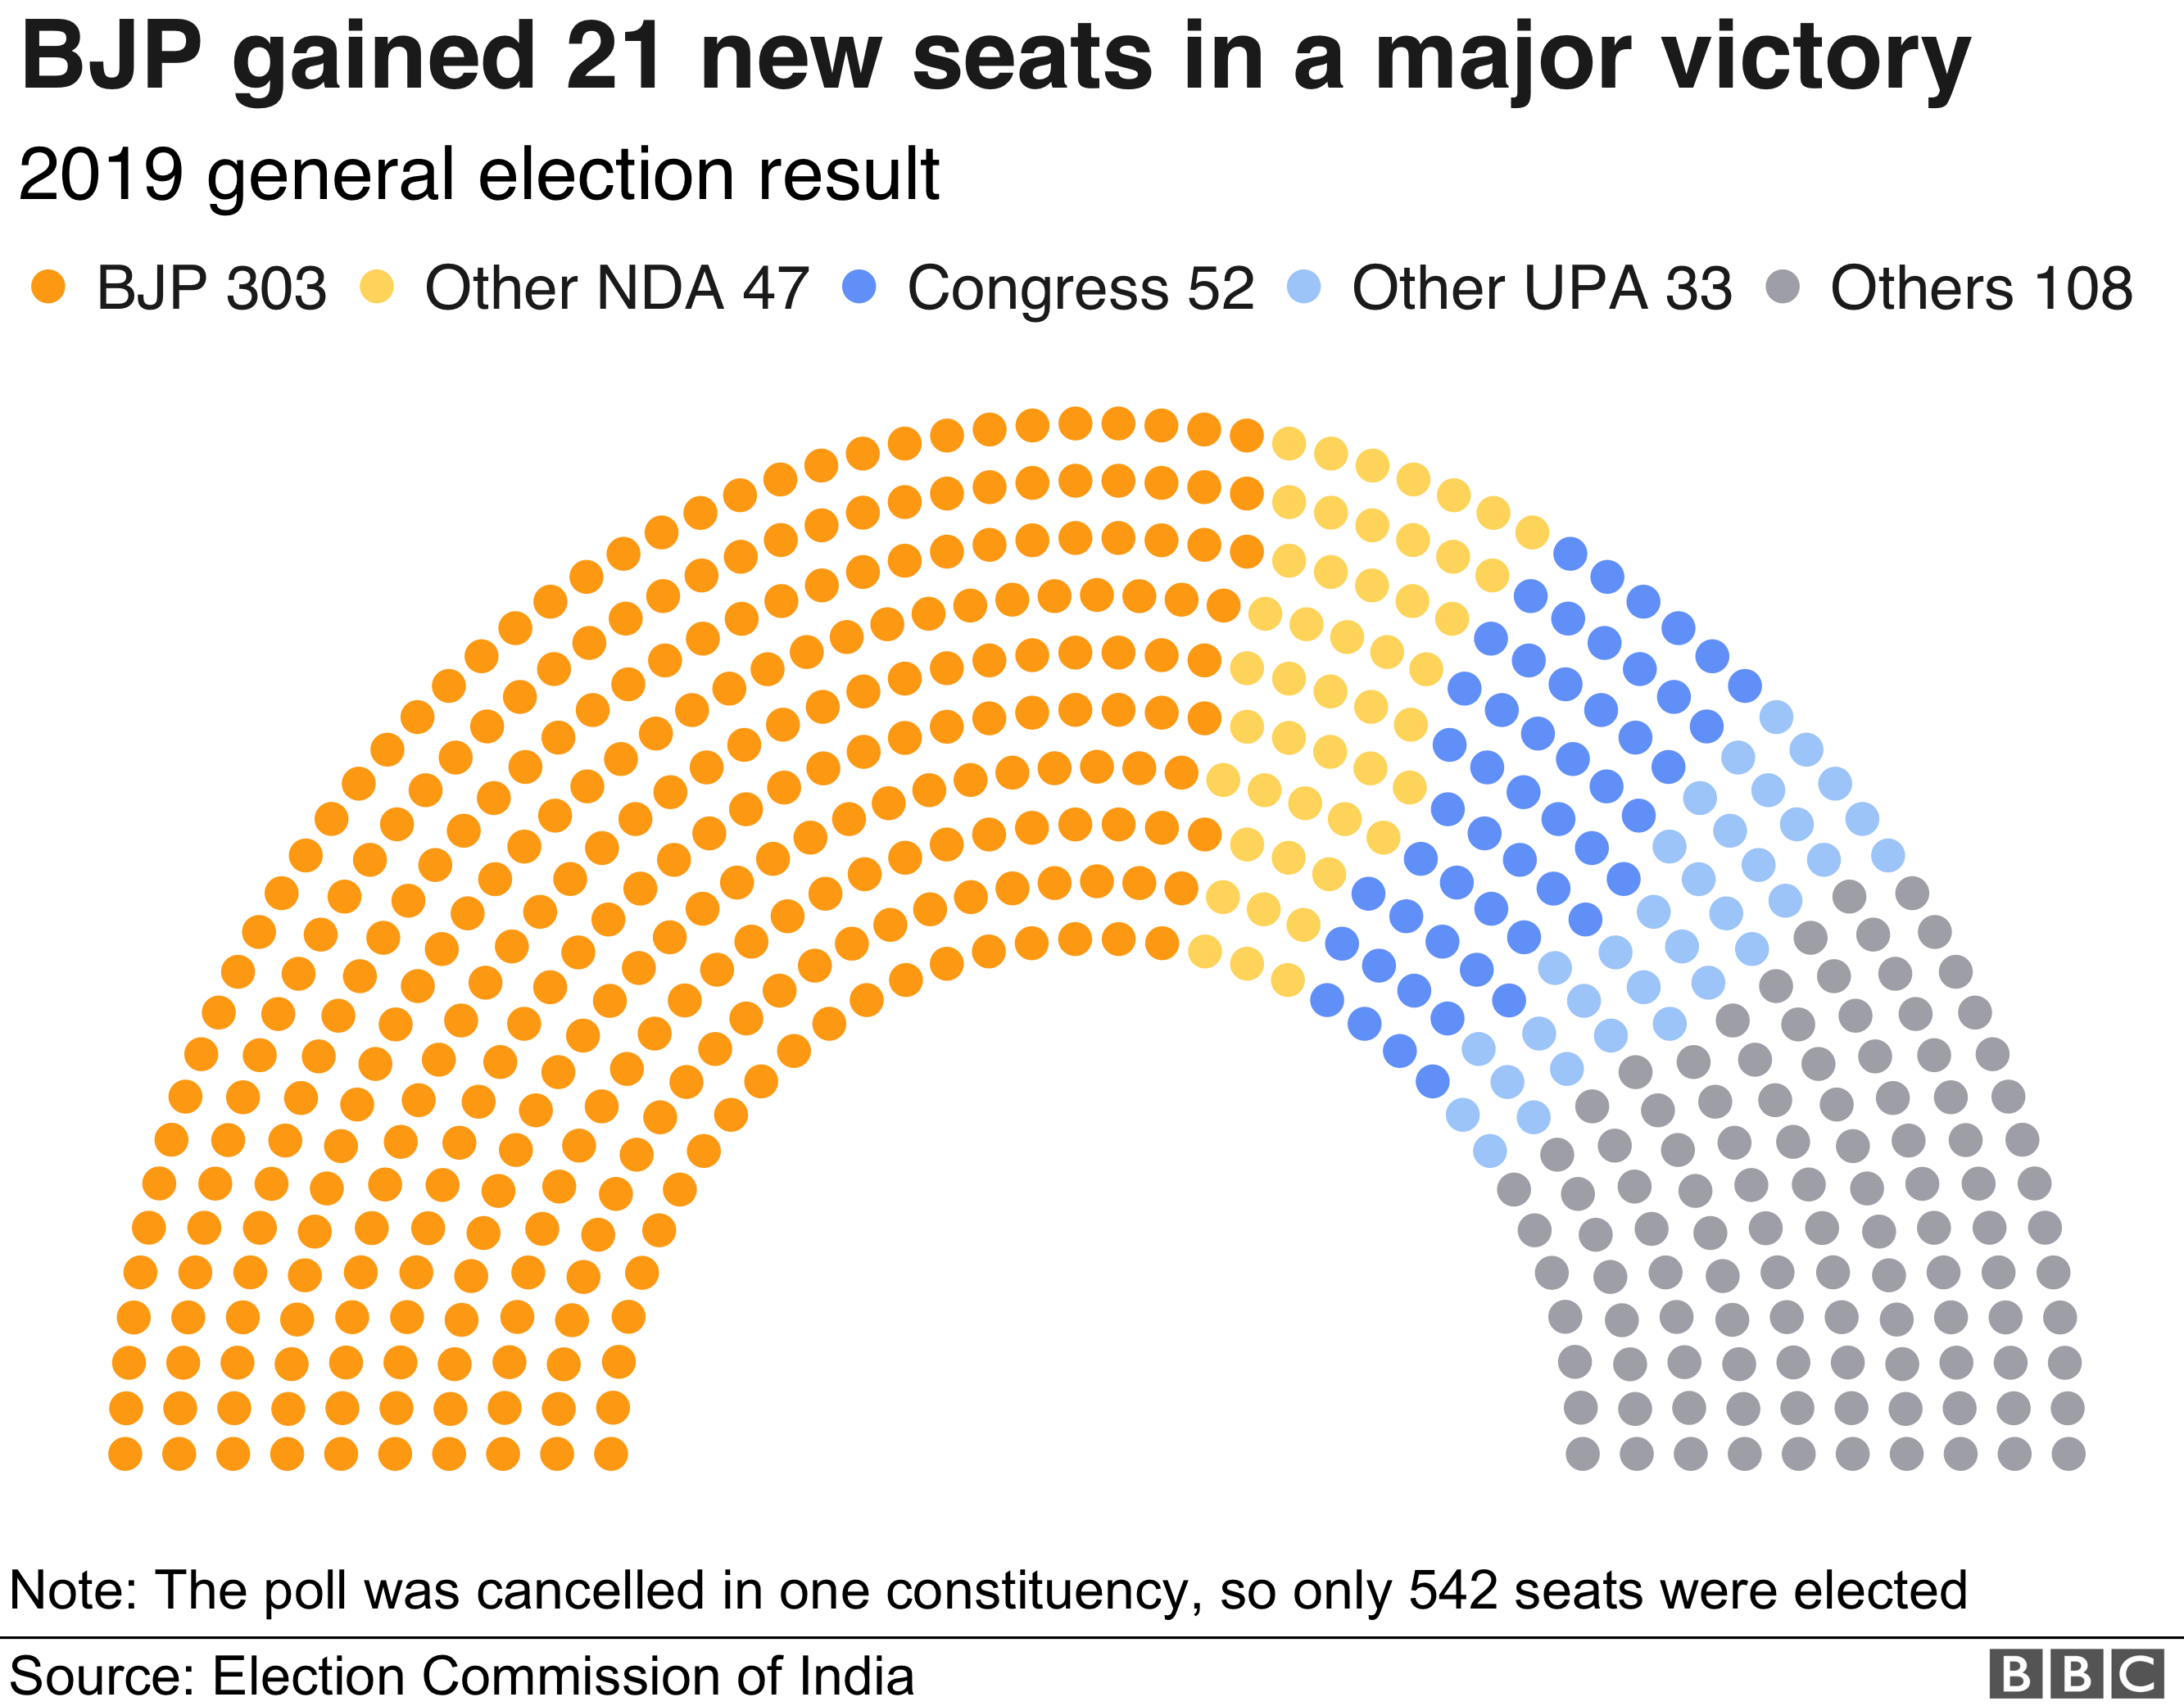 The BJP gained 21 new seats in a mayor victory